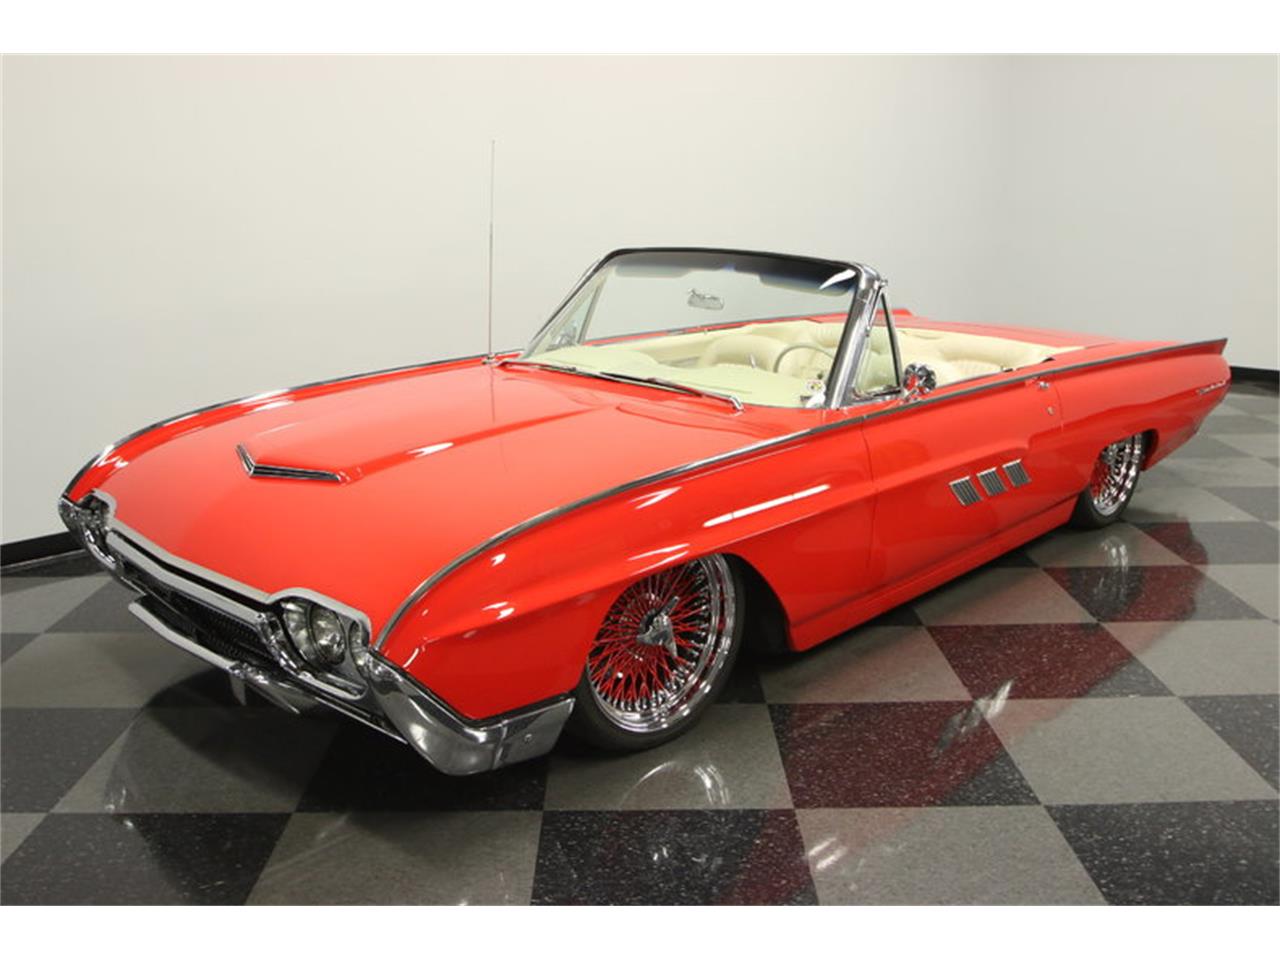 1963 ford thunderbird package tray